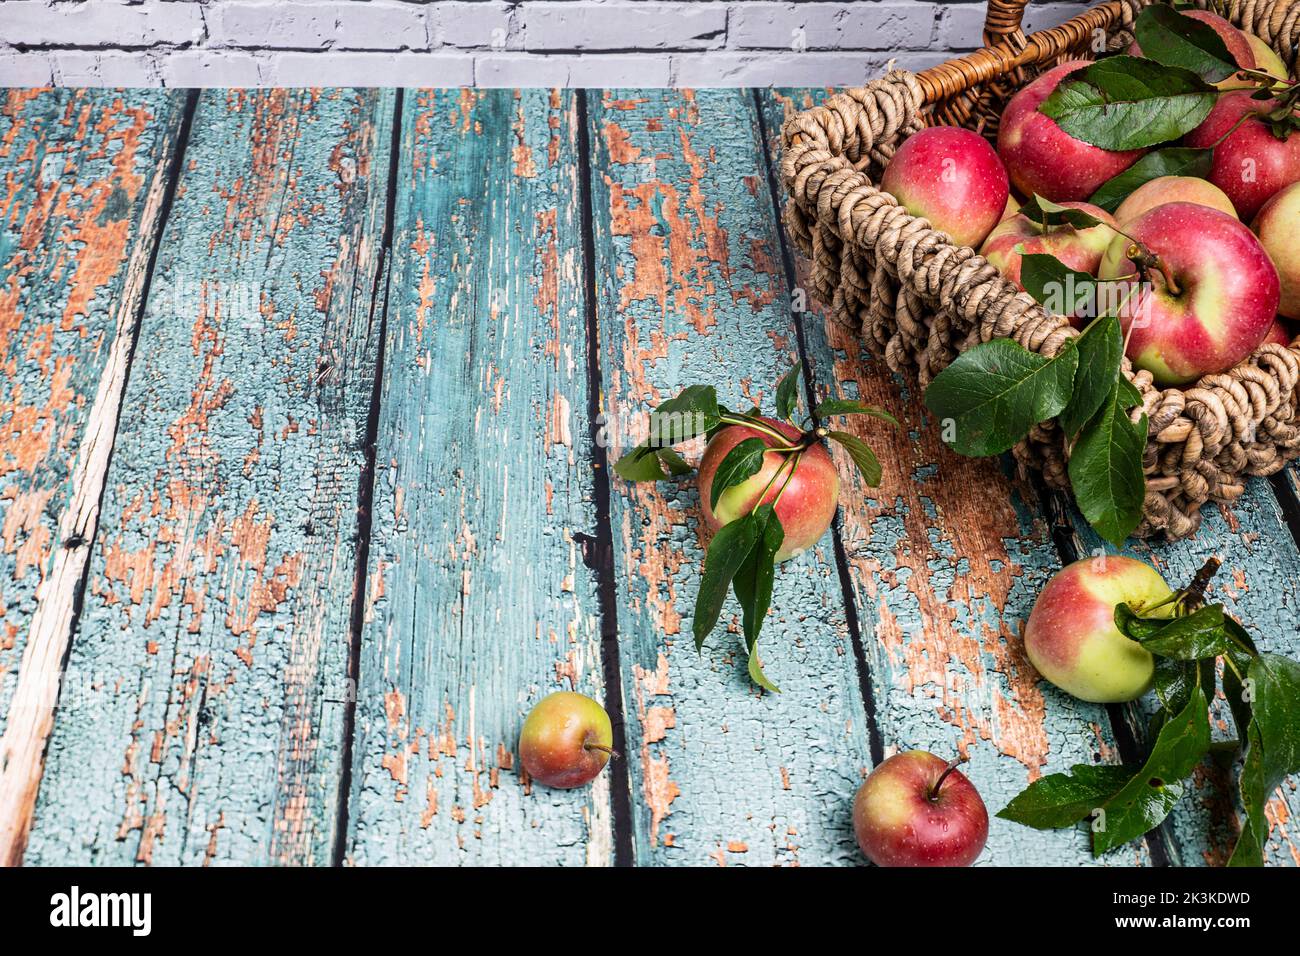 decorative plaited basket with fresh, red apples stands on an old tabletop Stock Photo